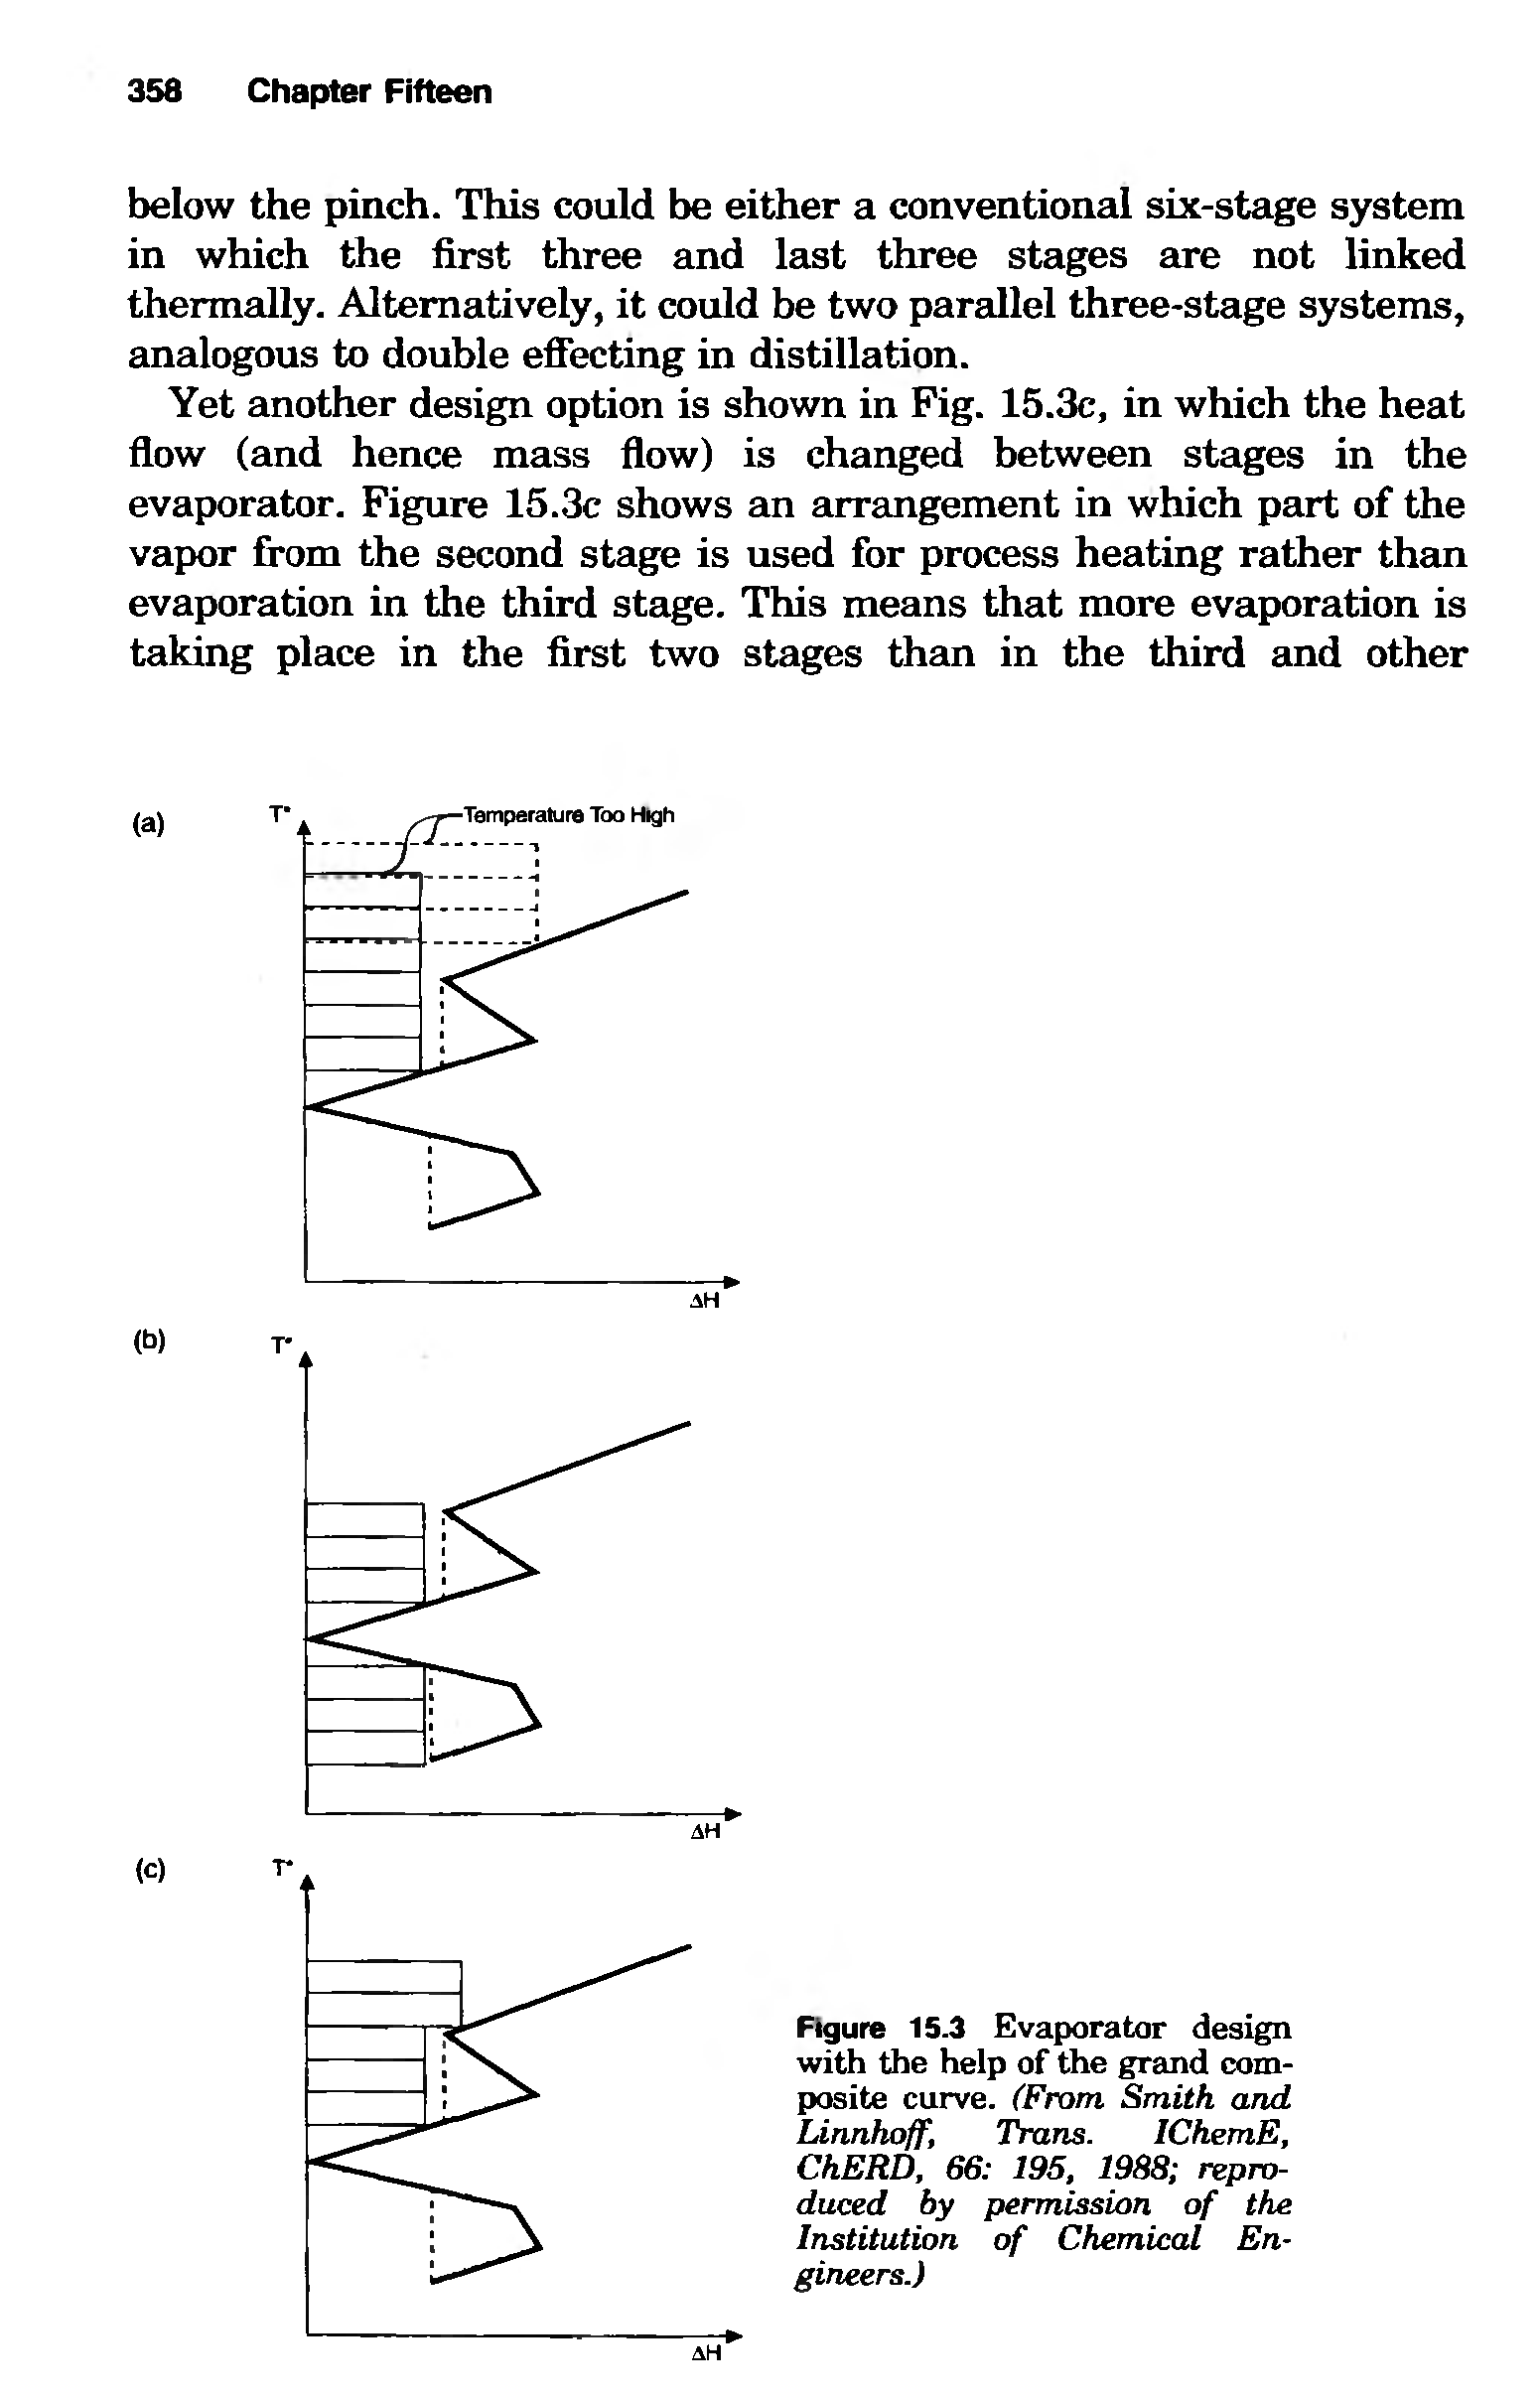 Figure 15.3 Evaporator design with the help of the grand composite curve. (From Smith and Linnhoff, Trans. ICkemE, ChERD, 66 195, 1988 reproduced by permission of the Institution of Chemical Engineers.)...